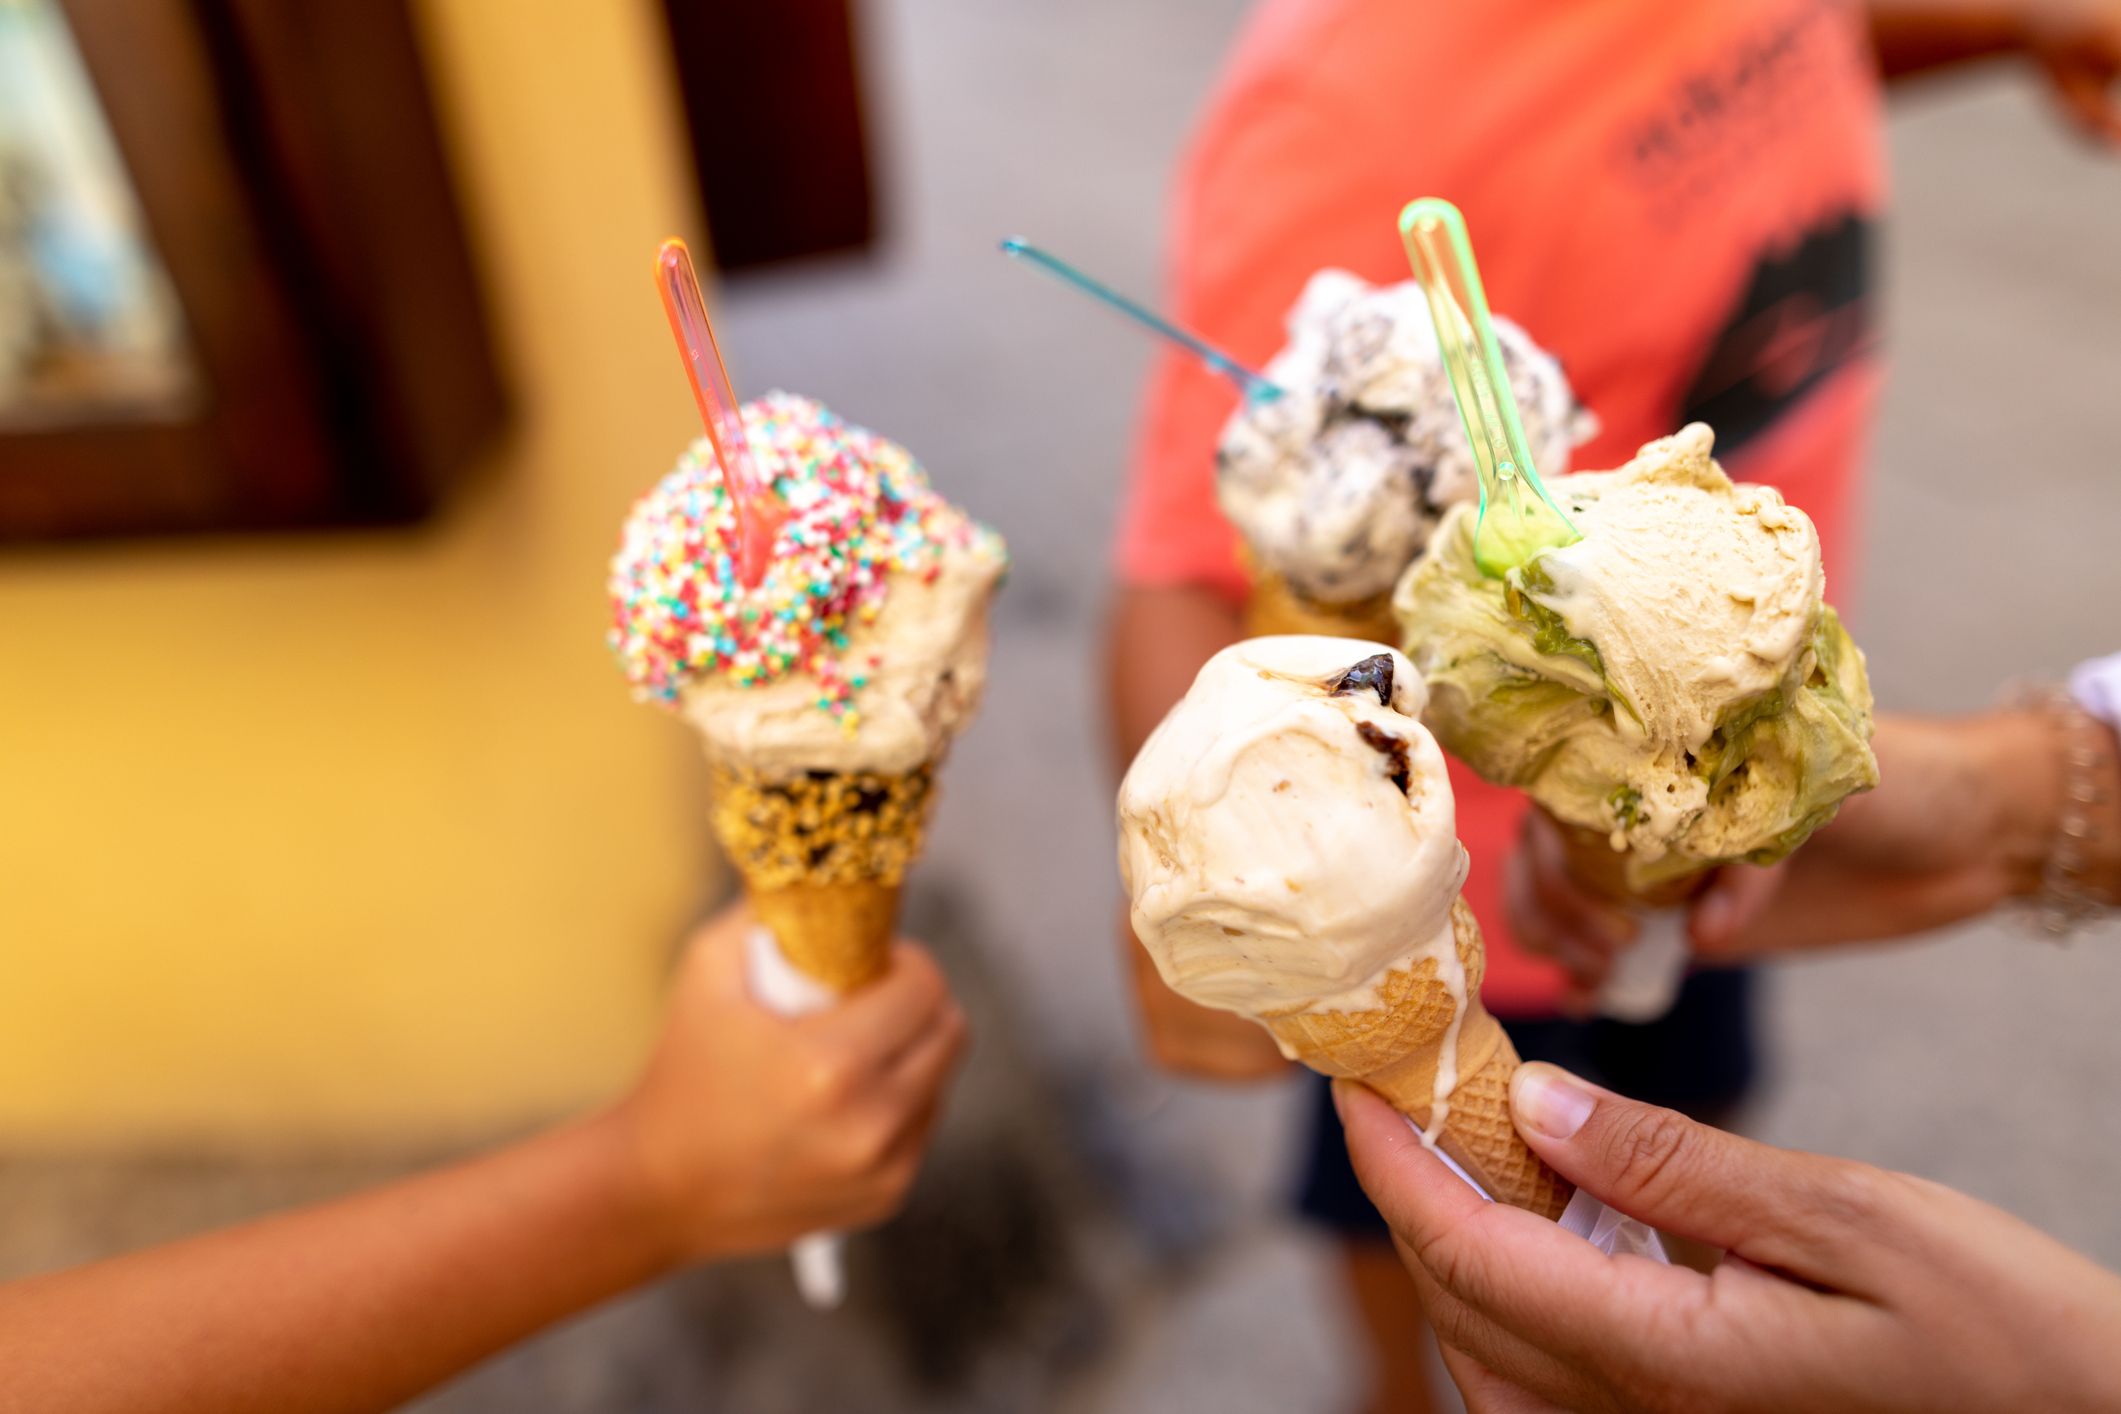 The Most Popular Ice Cream Flavors in Each State